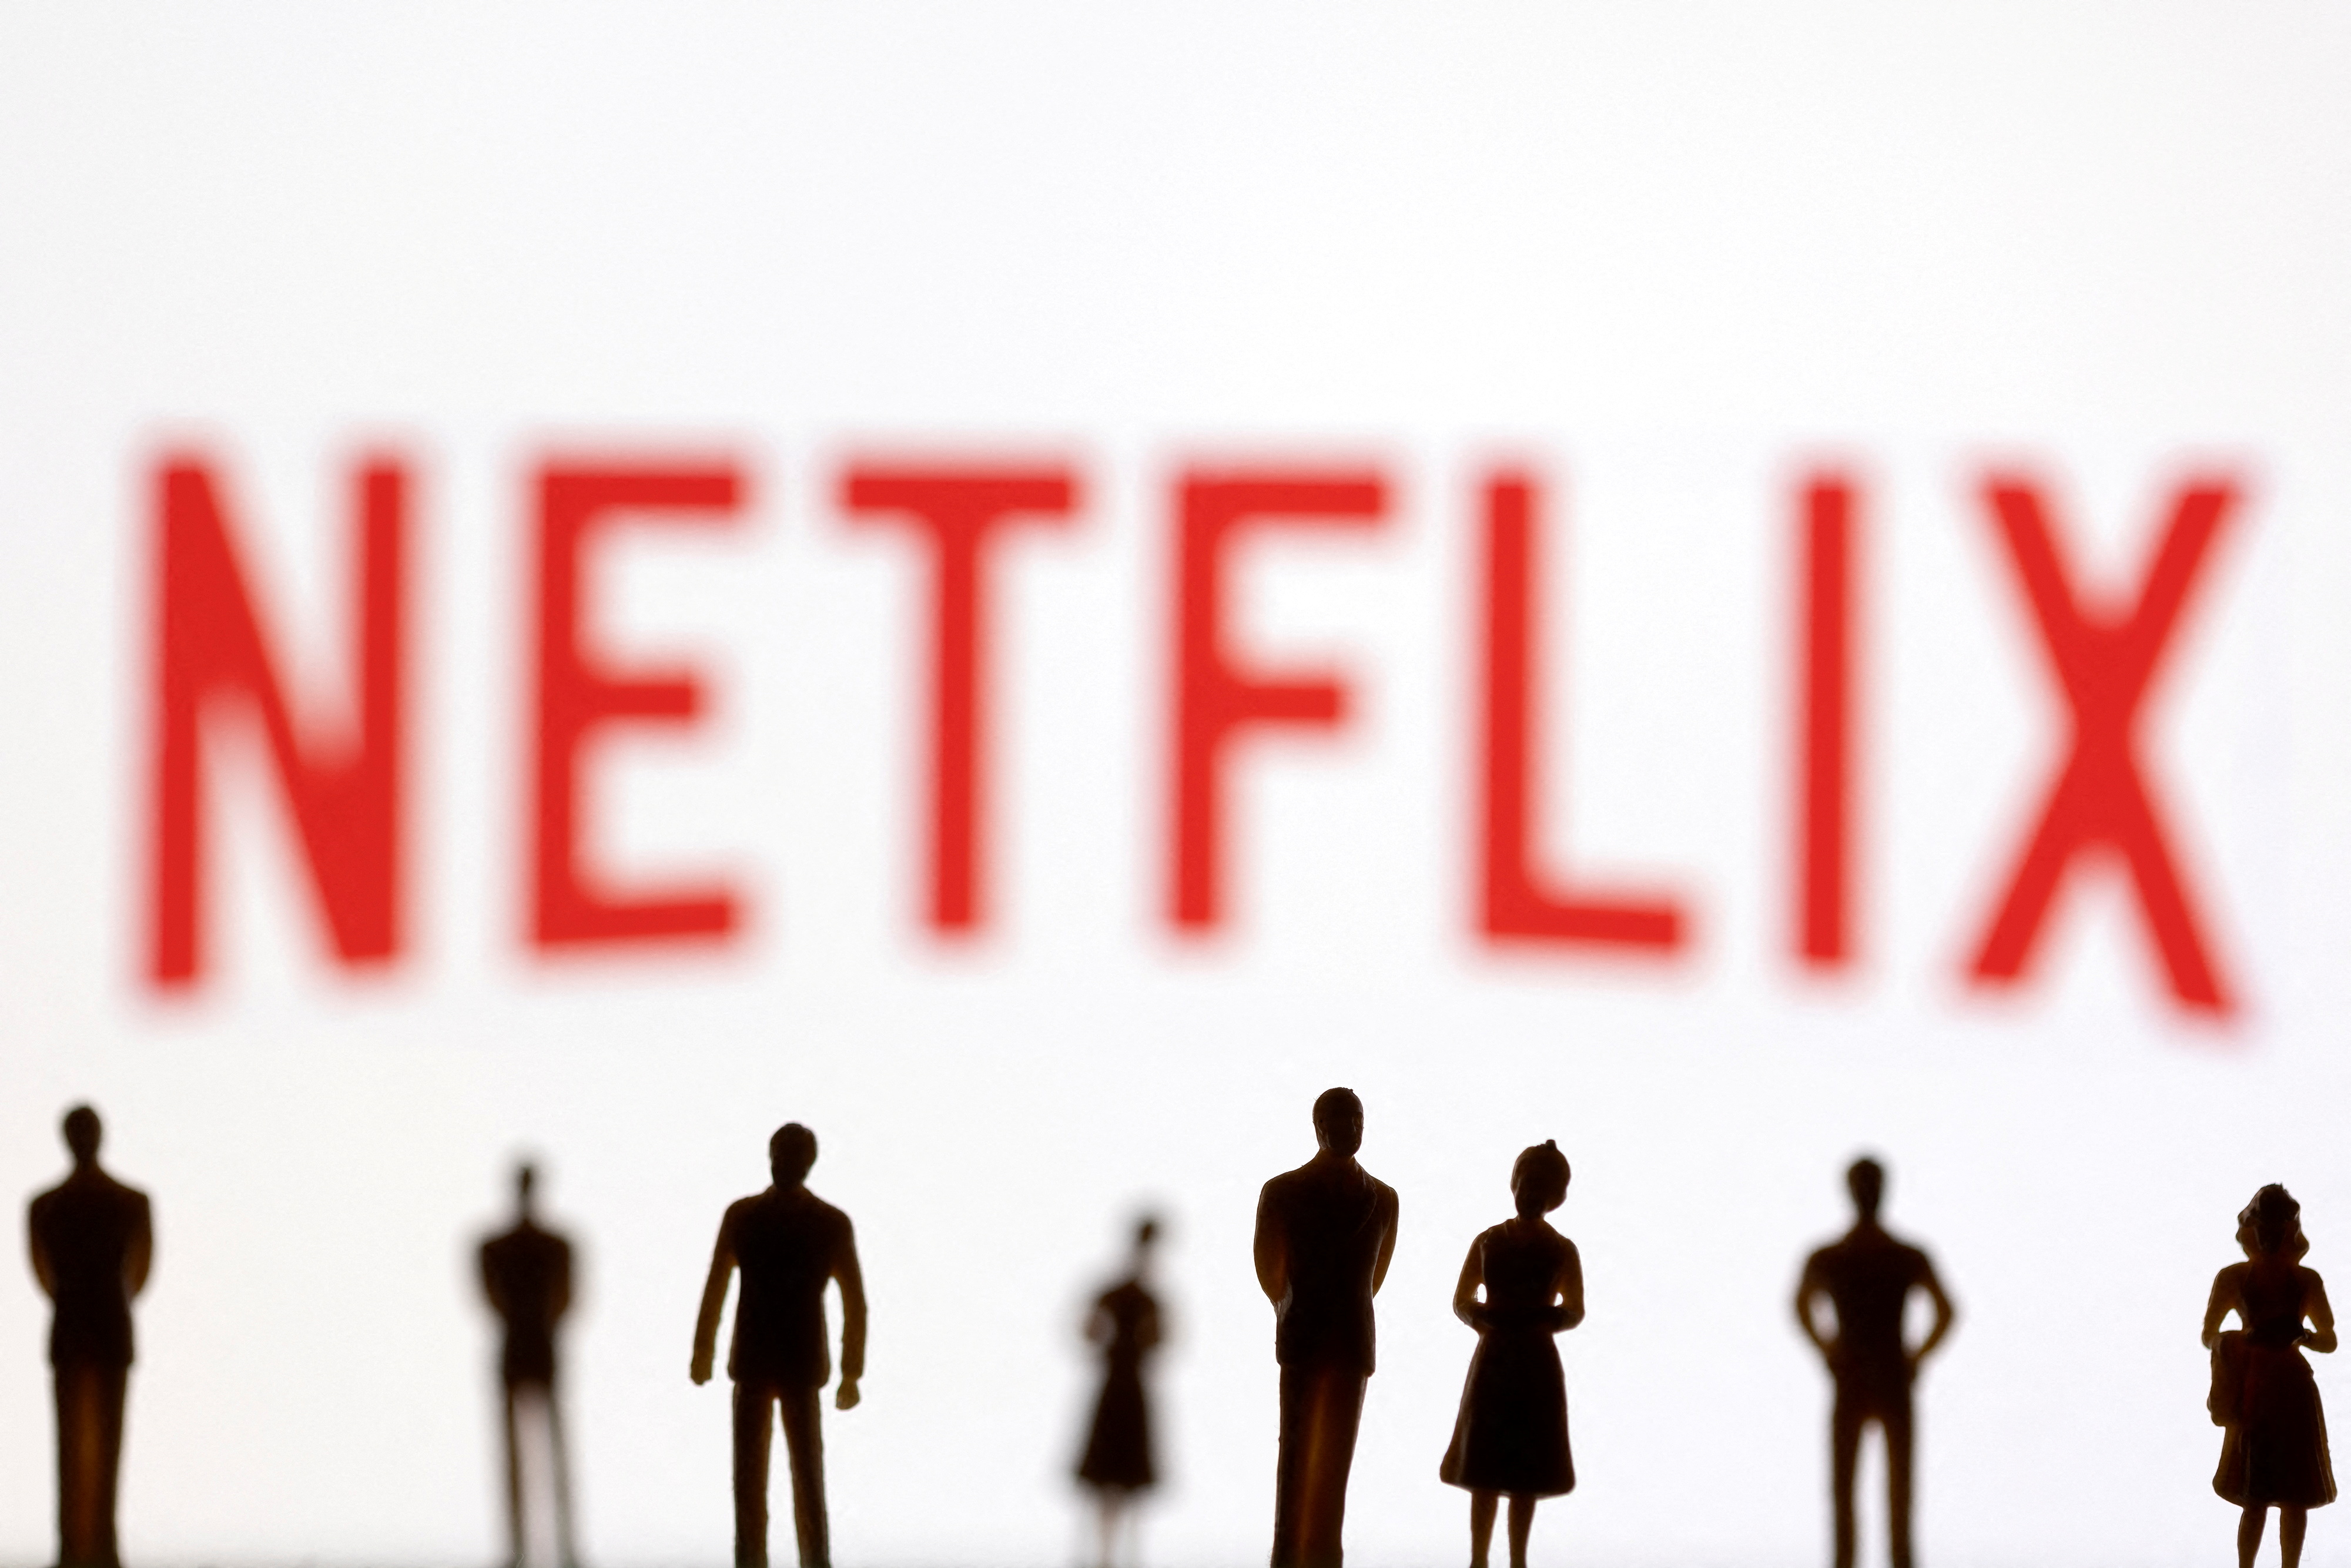 Netflix shares plummet more than 35% after reporting a drop in users and revenue (REUTERS / Given Ruvic)